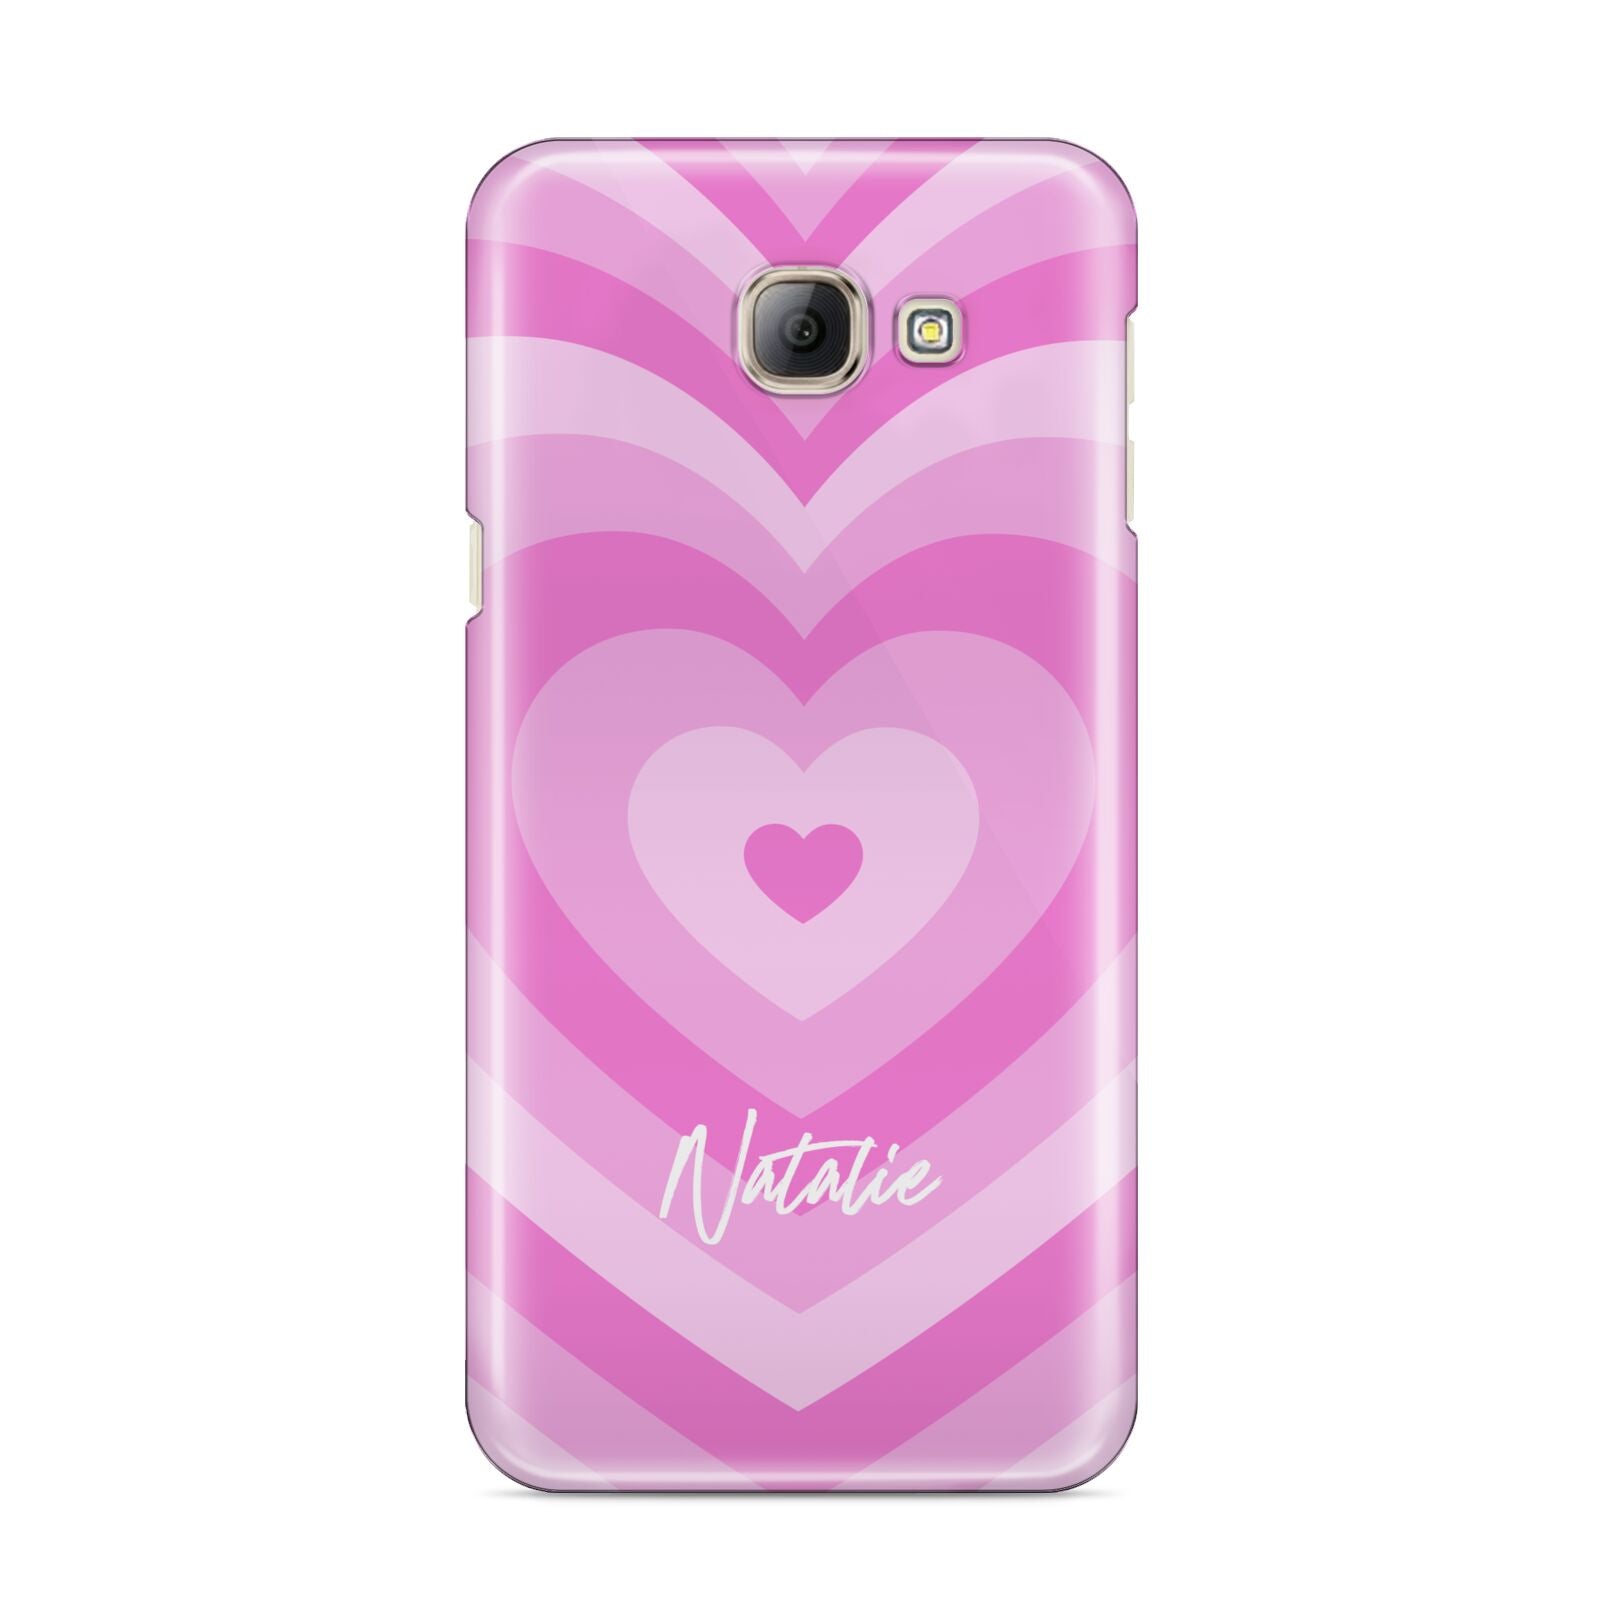 Personalised Pink Heart Samsung Galaxy A8 2016 Case